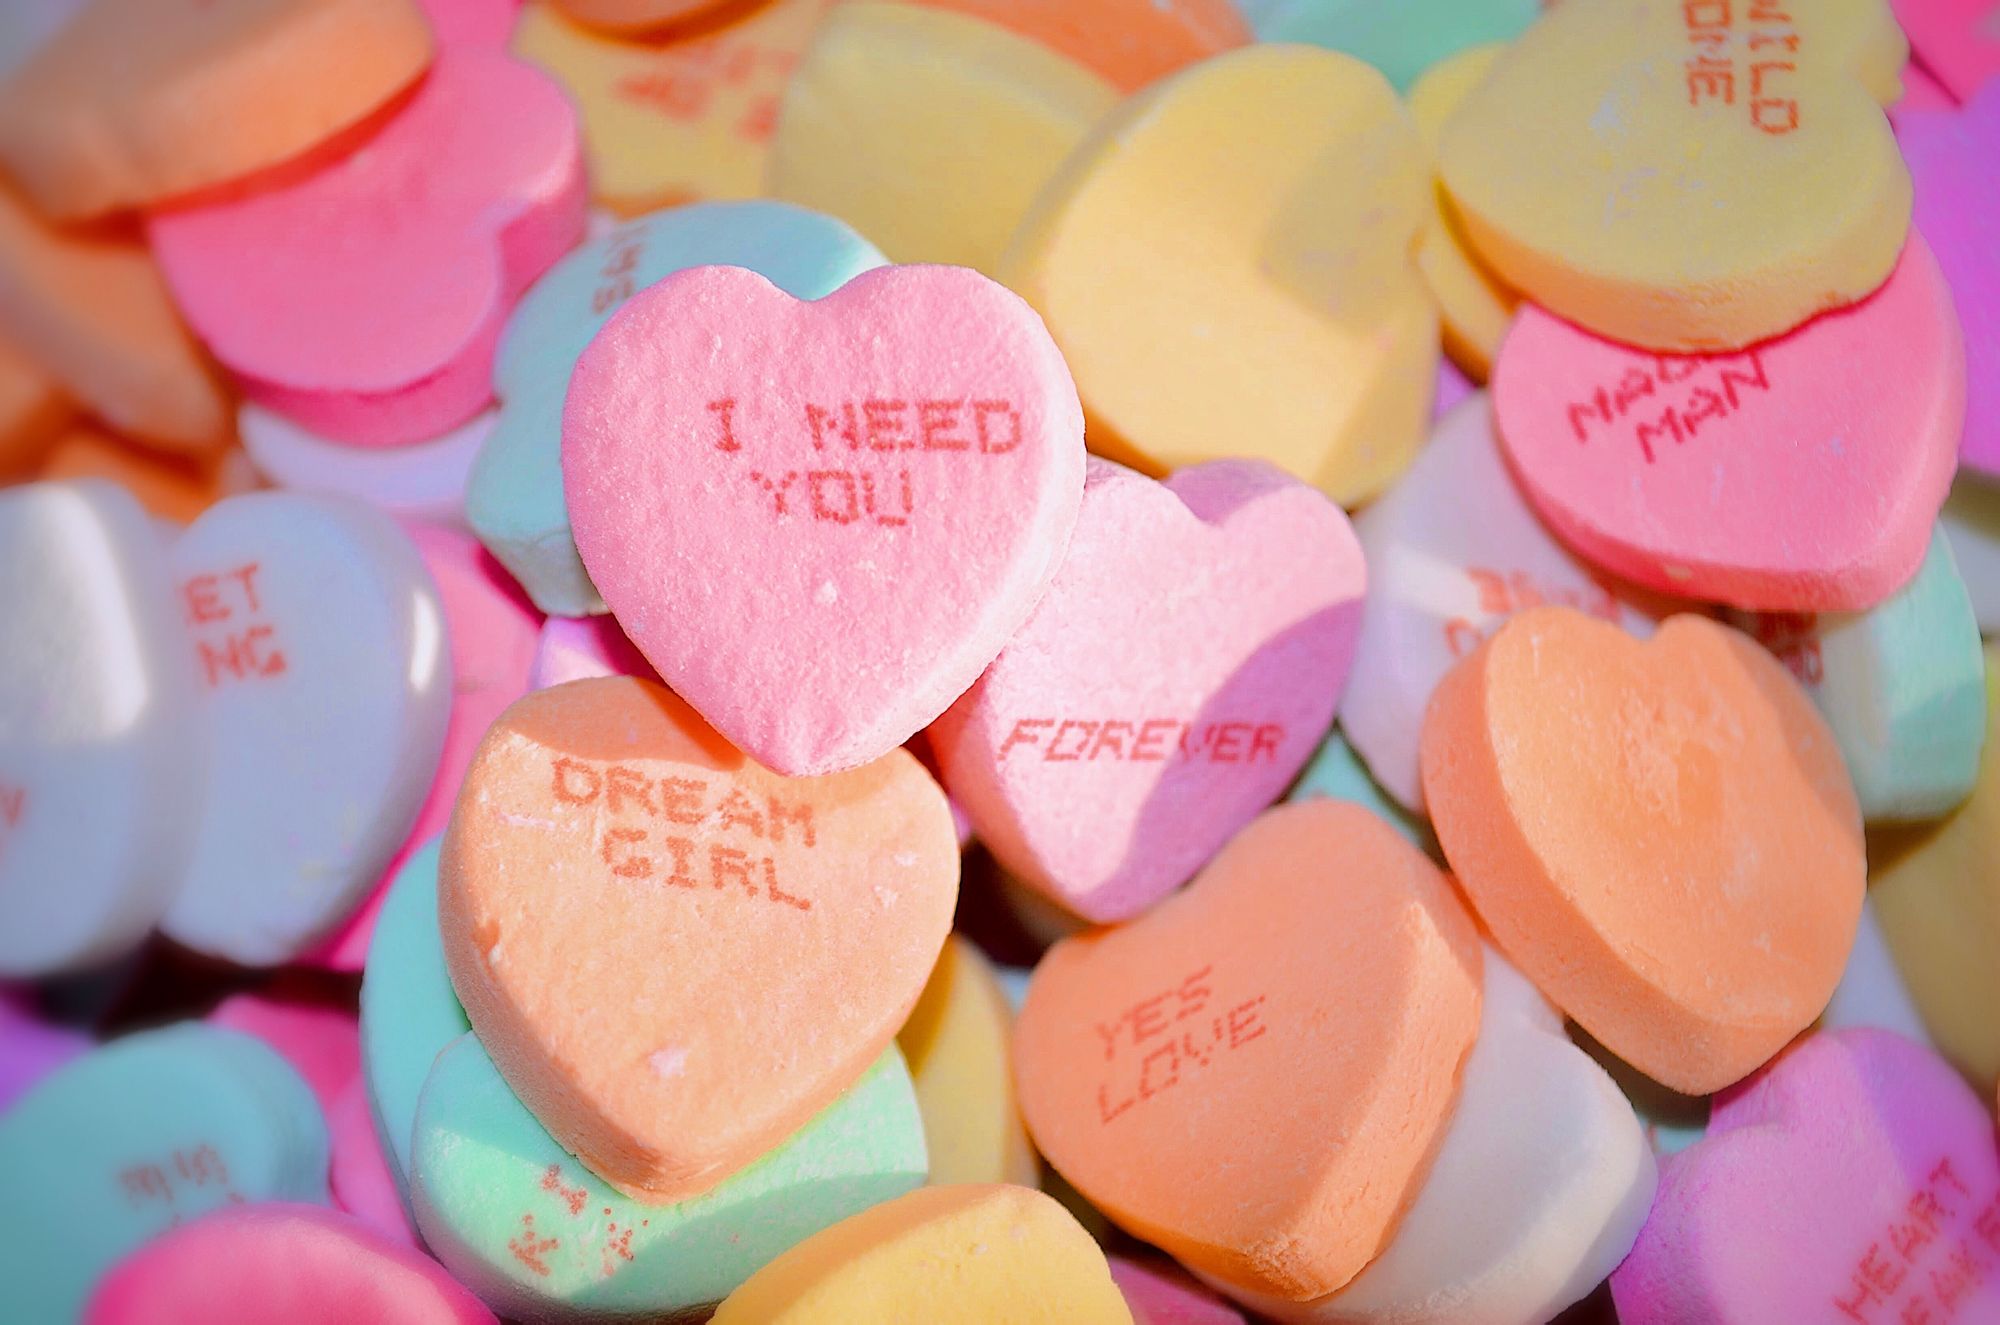 Candy hearts with words of love on them